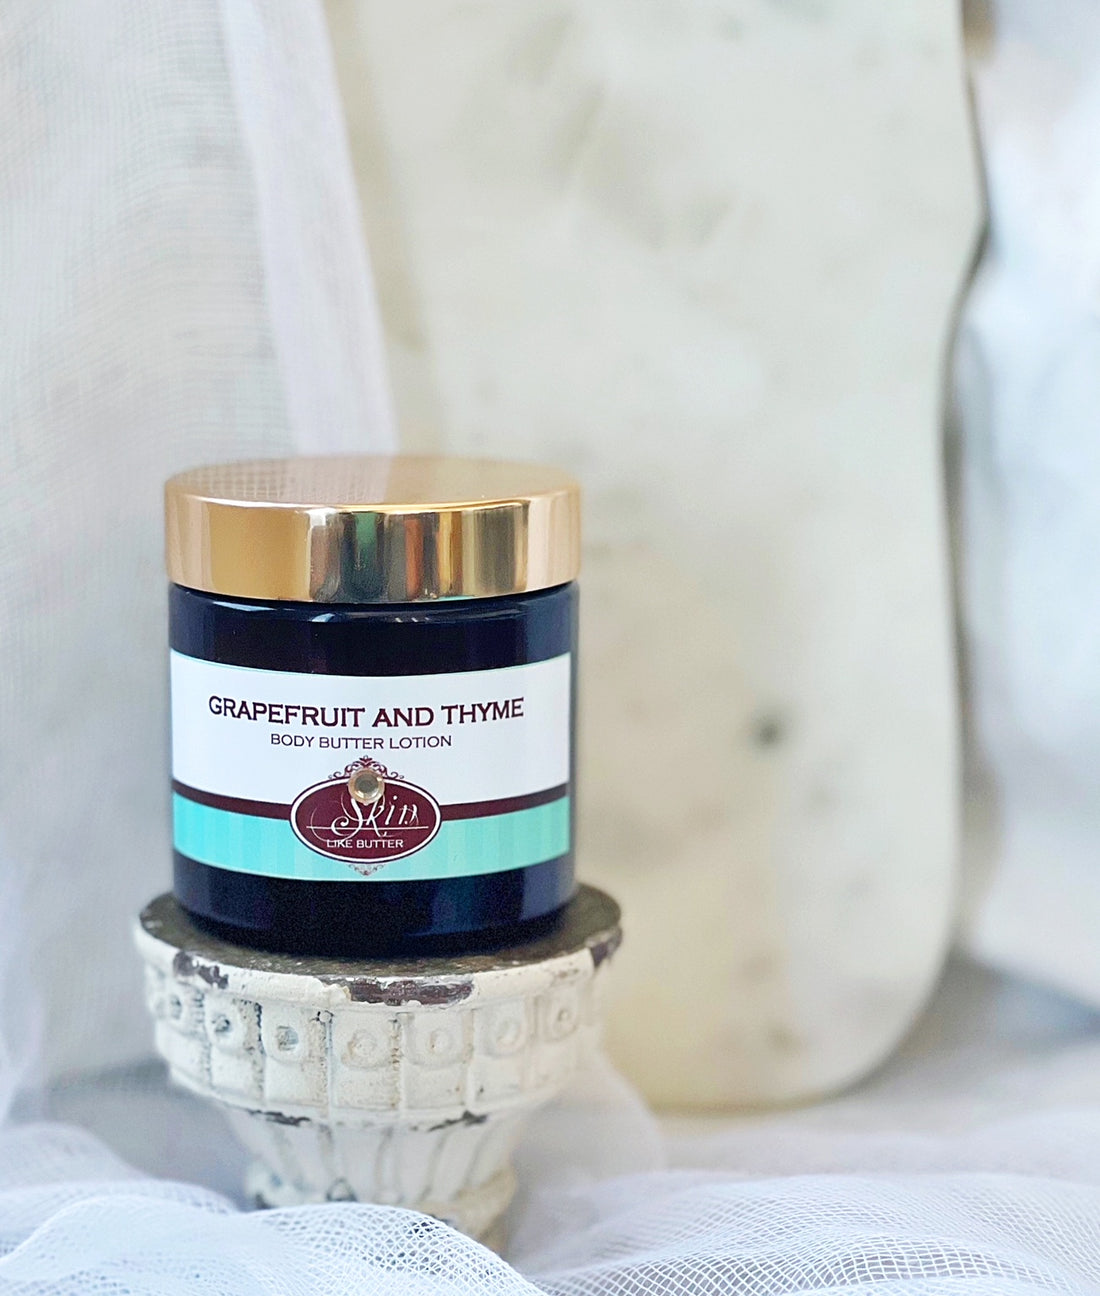 BLACK CHERRY  scented Body Butter -  BOGO - Buy  One 16 oz family size, get 1 any size 50% off deal